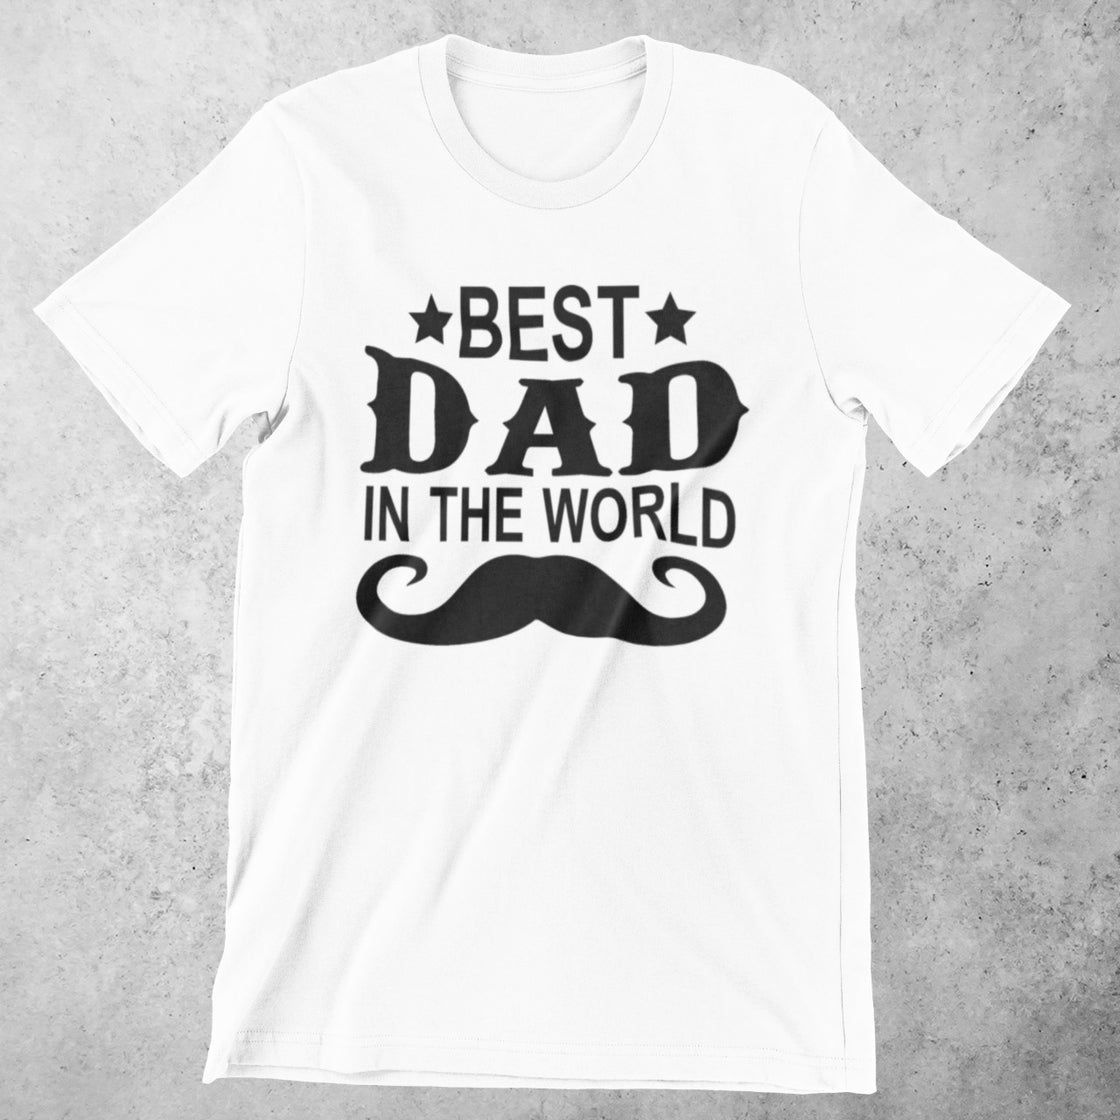 Best dad in the world T-shirt